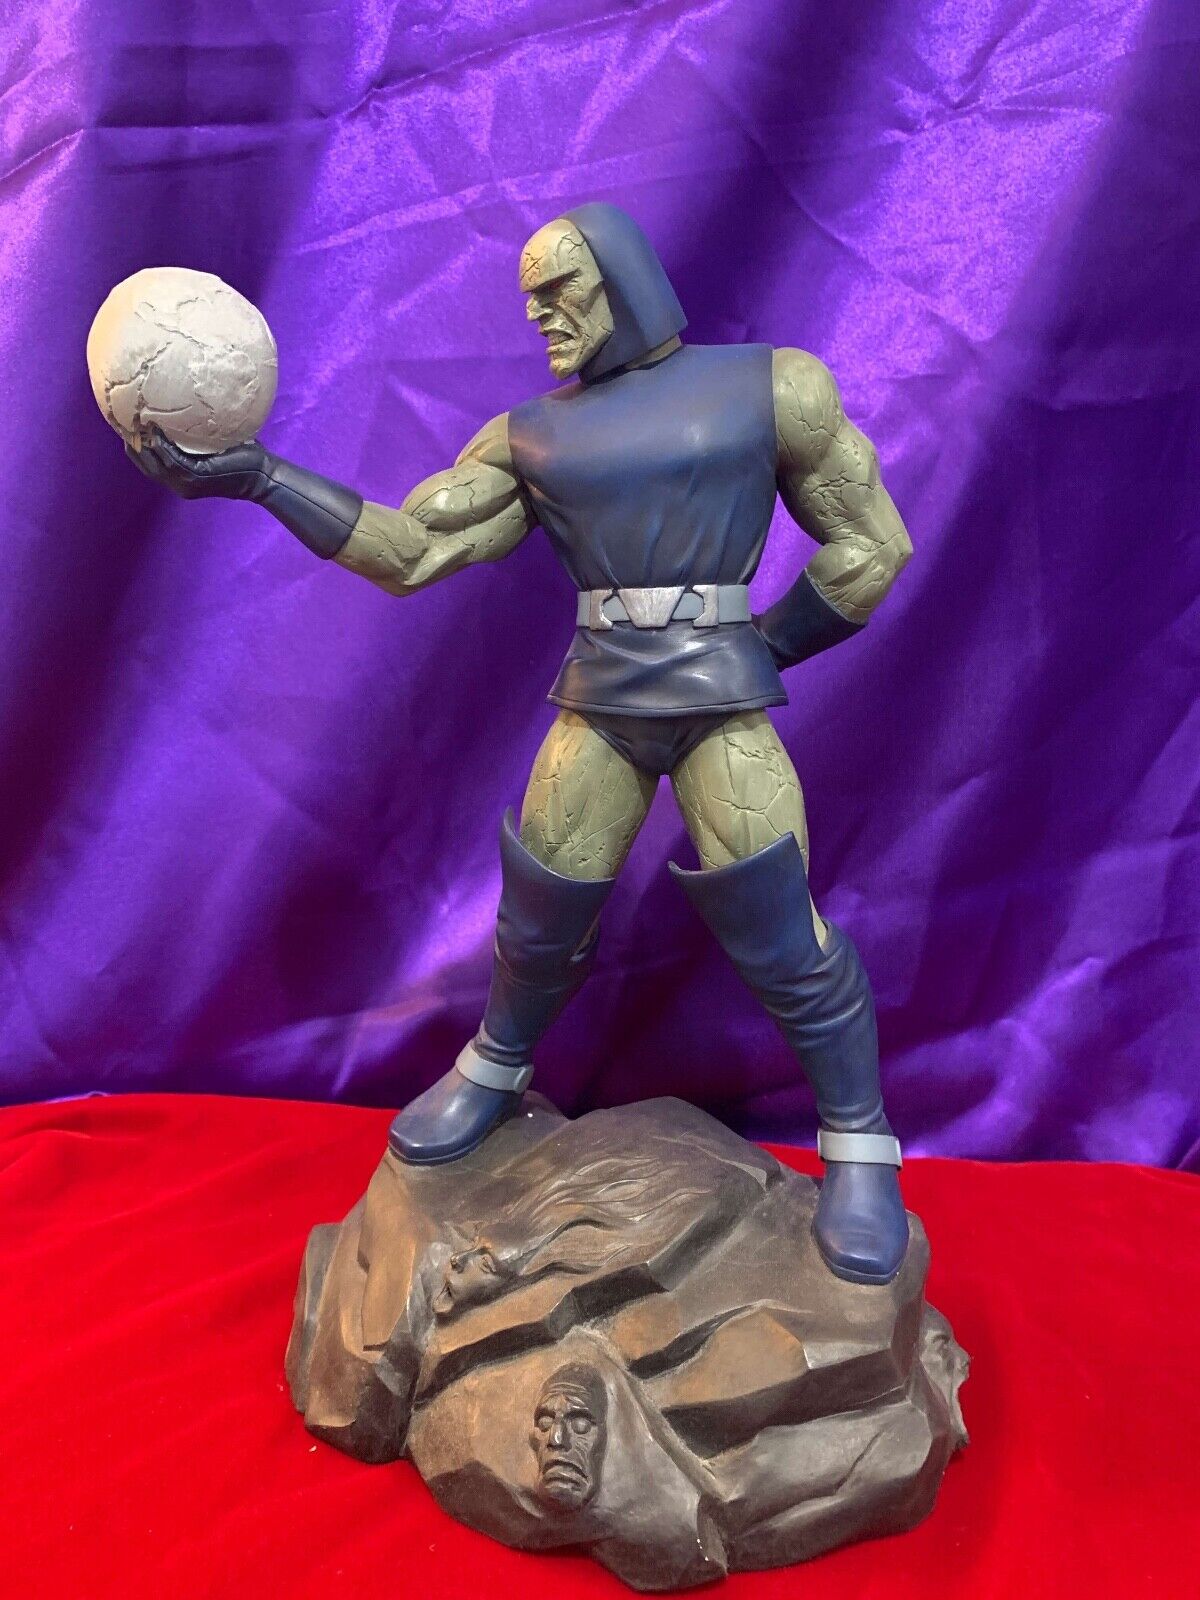 DARKSEID Statue #187/1300 Sculpted By William Paquet 1999 DC Comics not sideshow